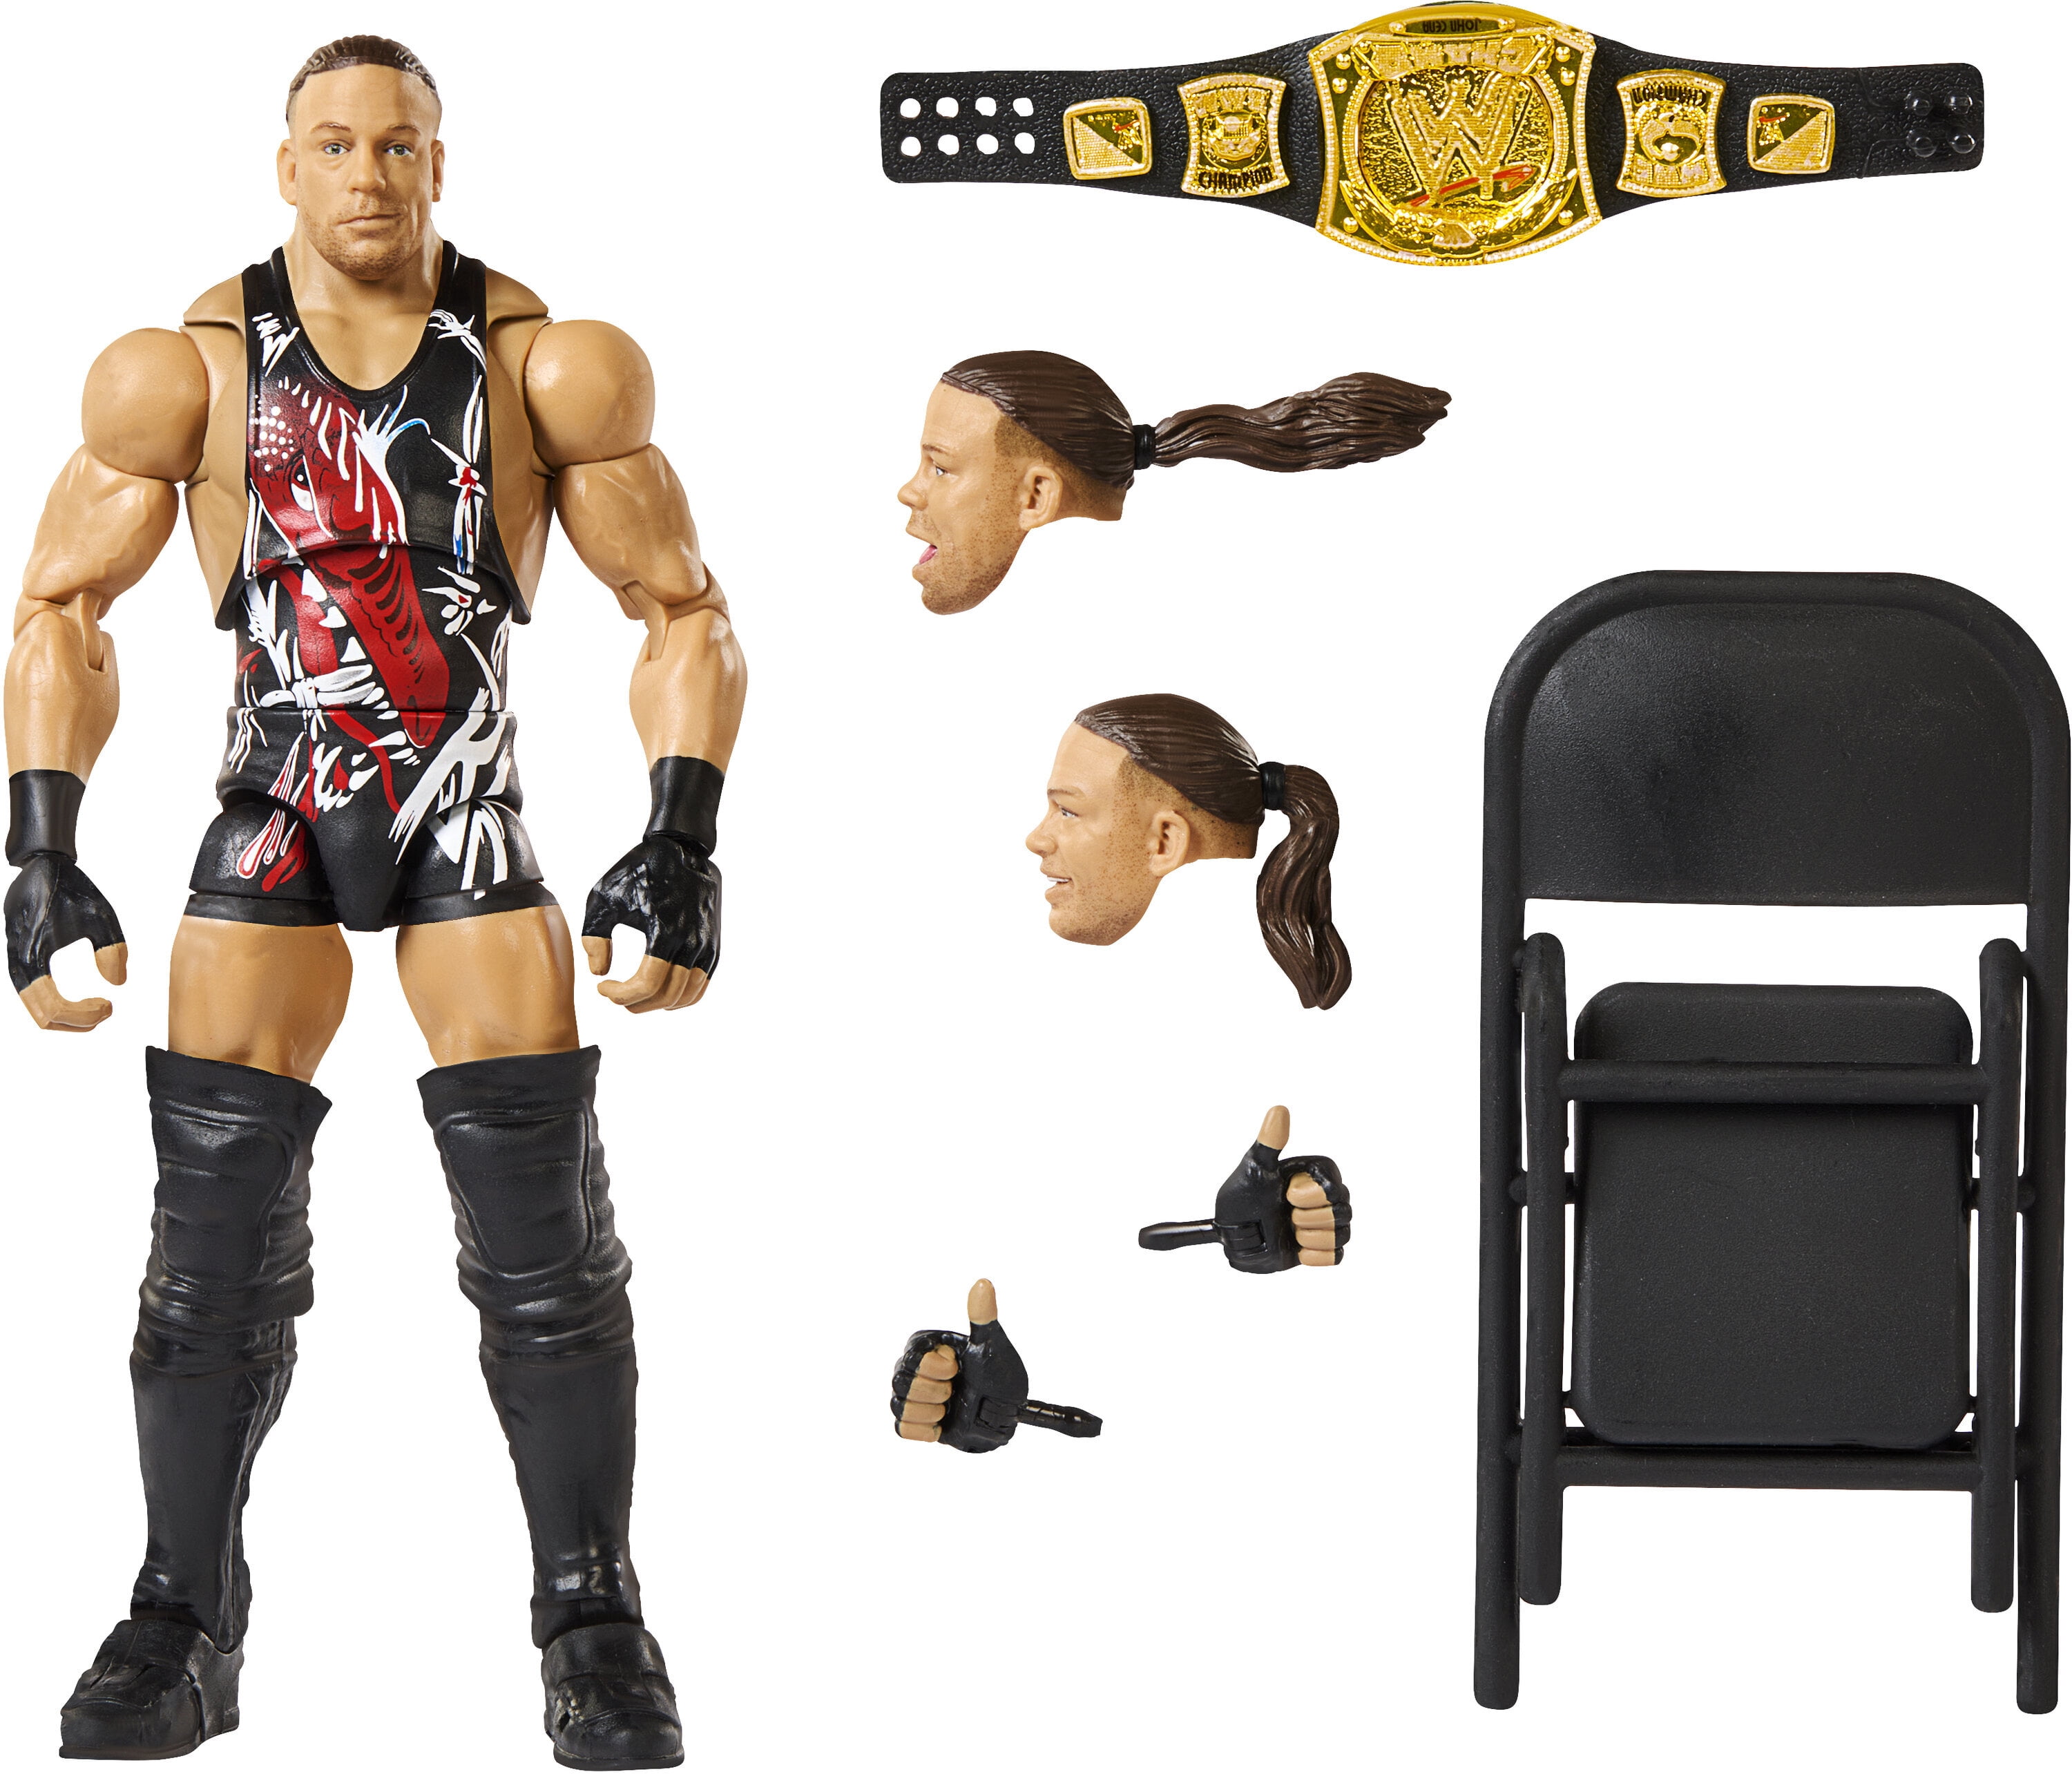 WWE Action Figure Ultimate Edition Ruthless Aggression Rob Van Dam